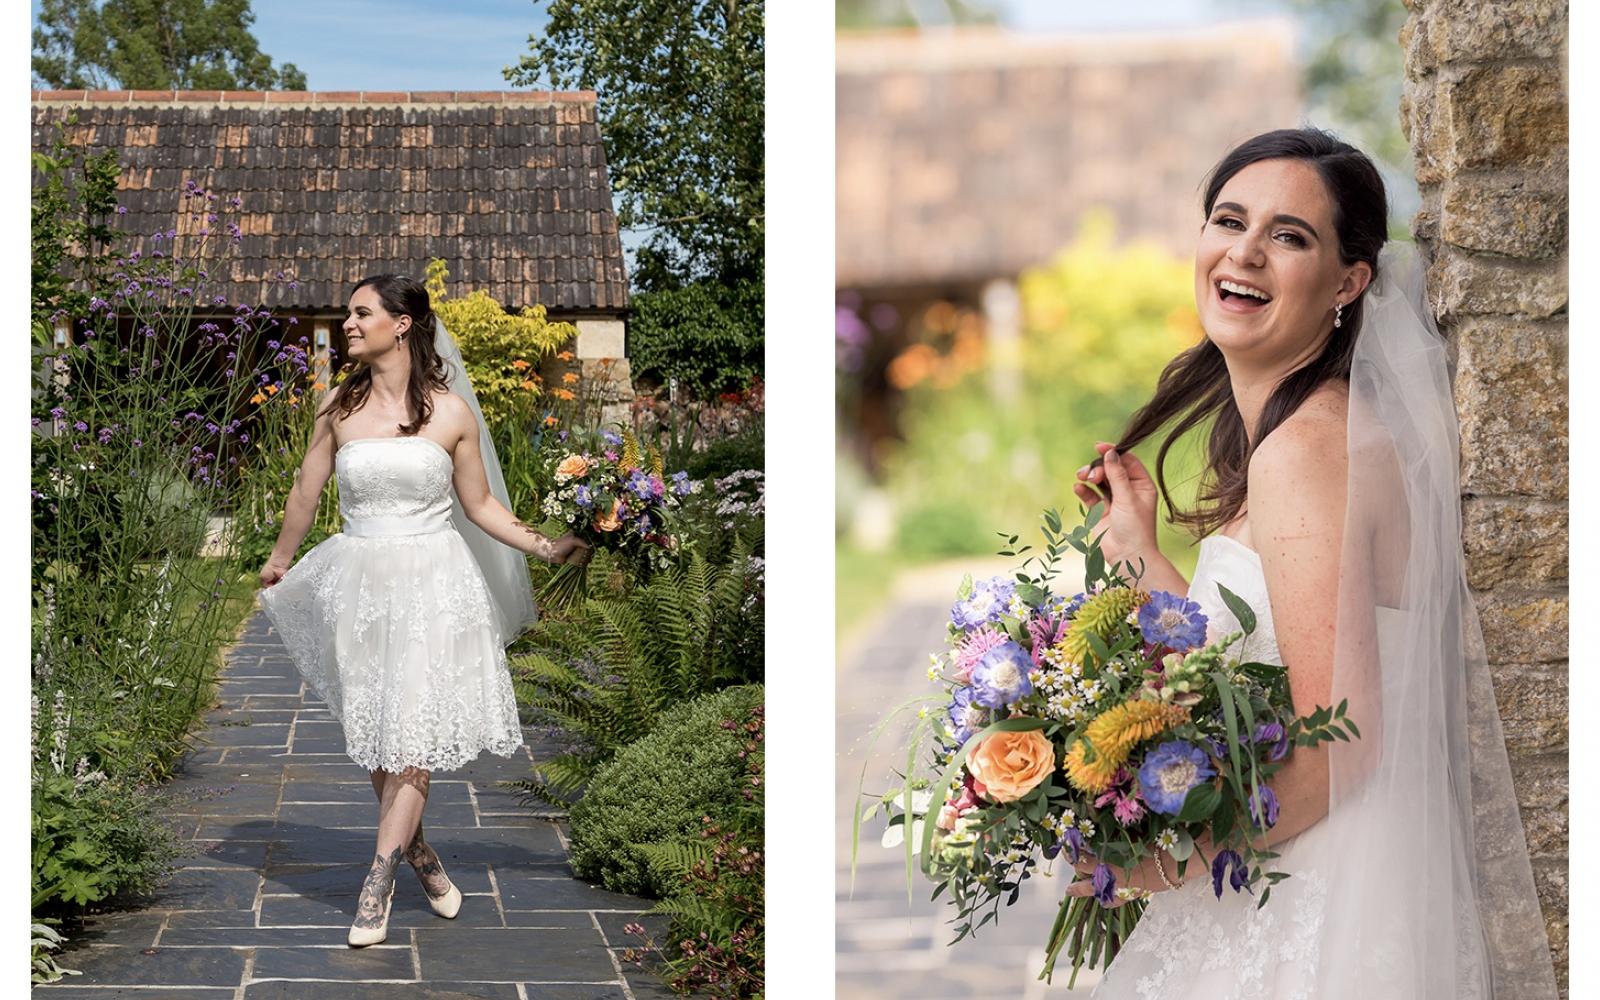 Whitewed Directory real wedding inspiration styled shoot by Copper & Blossom Wiltshire photographer oxfam dress eco friendly